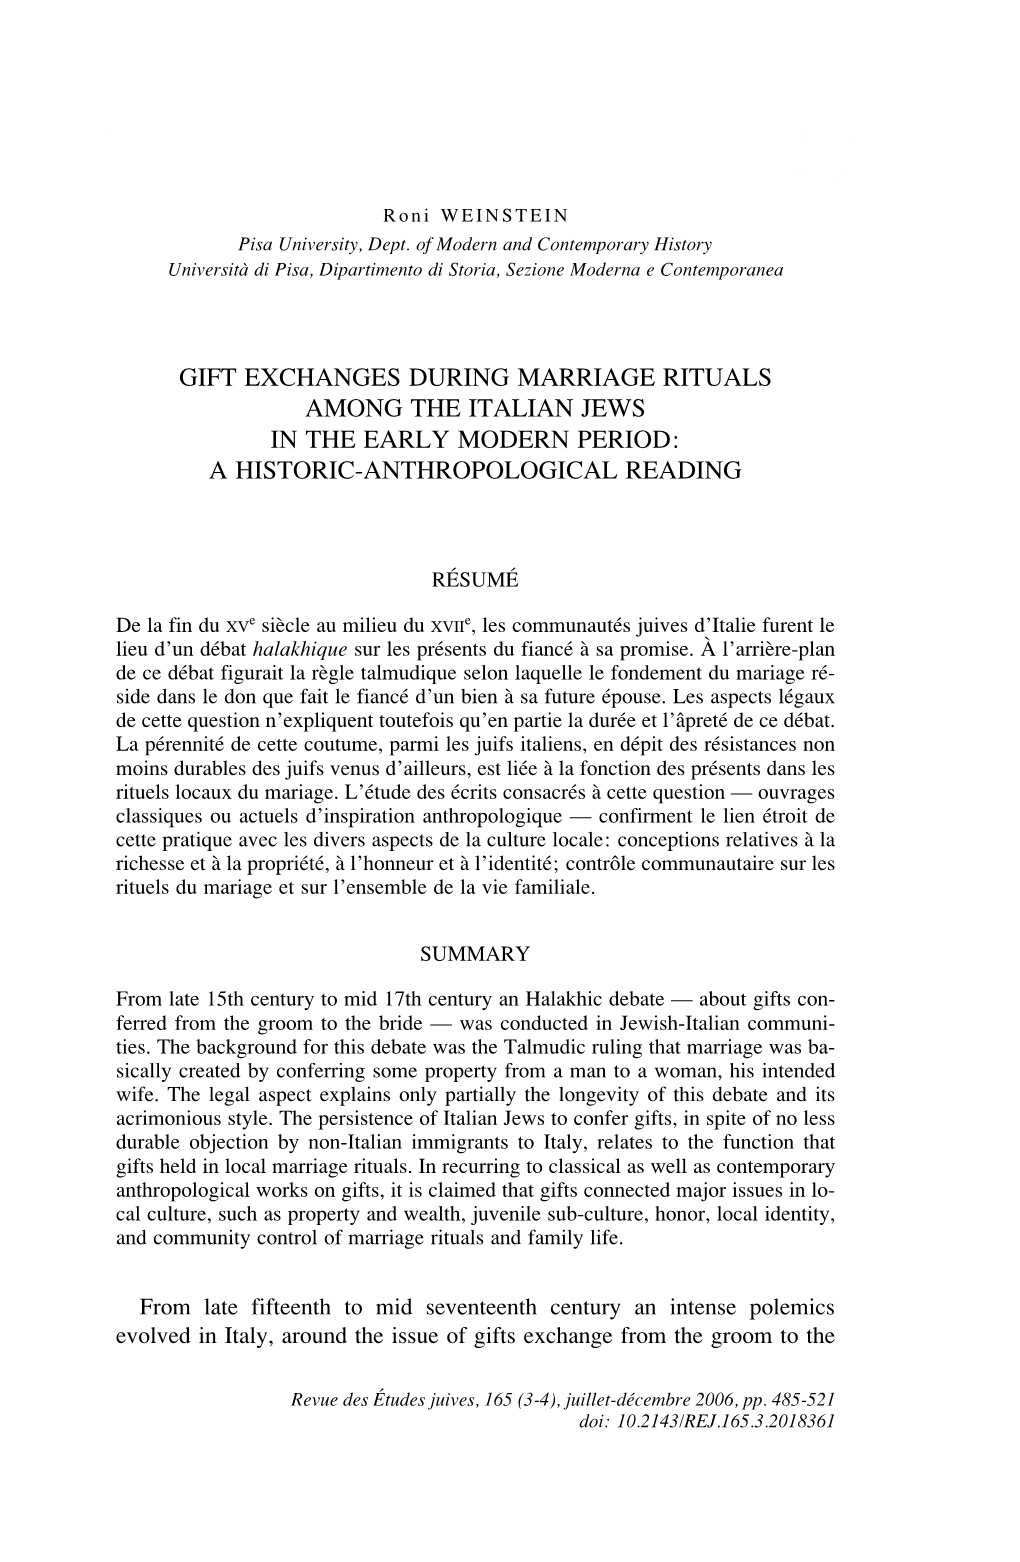 Gift Exchanges During Marriage Rituals Among the Italian Jews in the Early Modern Period: a Historic-Anthropological Reading